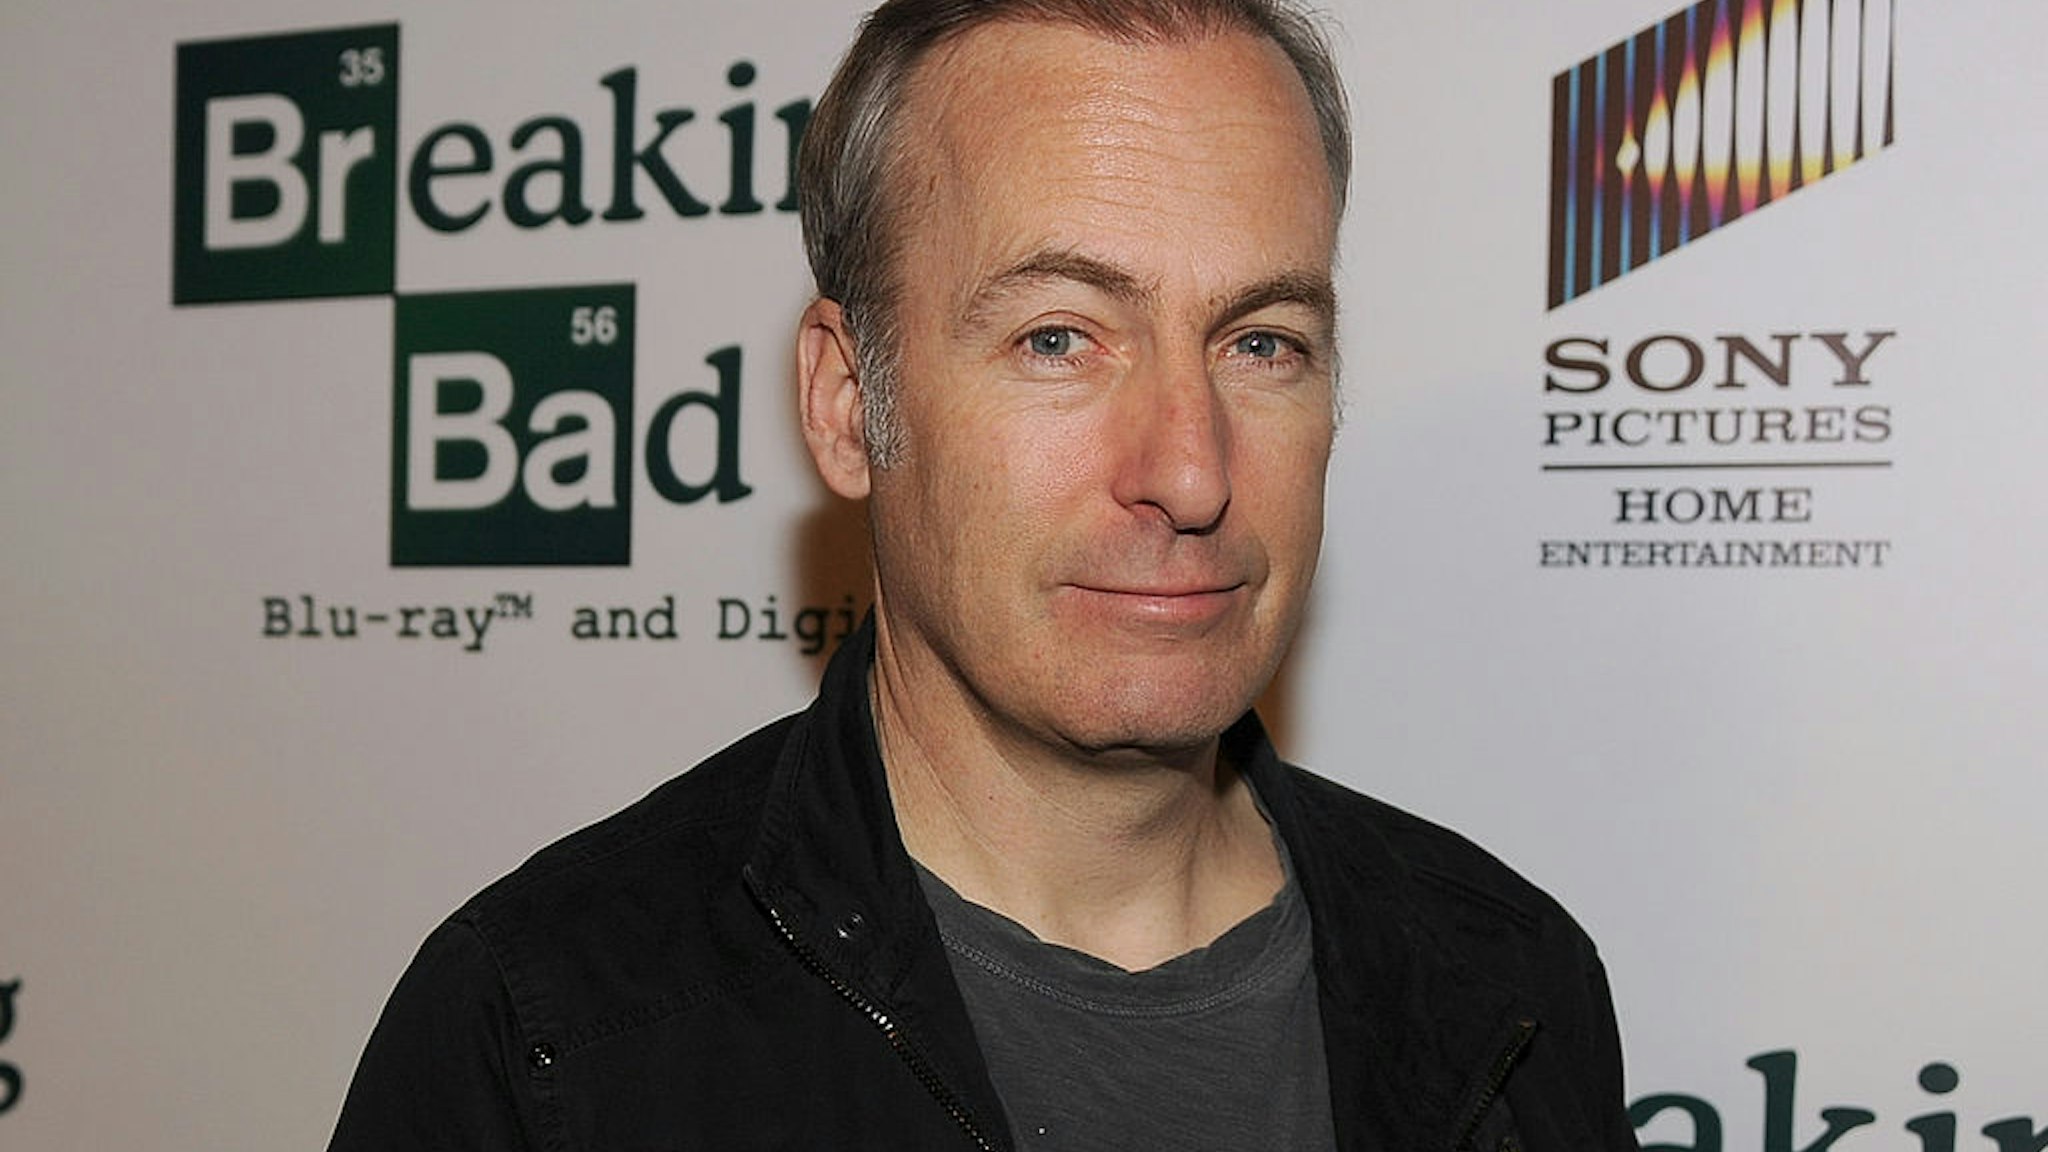 LOS ANGELES, CA - NOVEMBER 25: Actor Bob Odenkirk arrives at the screening of "No Half Measures: Creating The Final Season Of Breaking Bad" DVD Launch at Pacific Theatres at the Grove on November 25, 2013 in Los Angeles, California. (Photo by Kevin Winter/Getty Images)